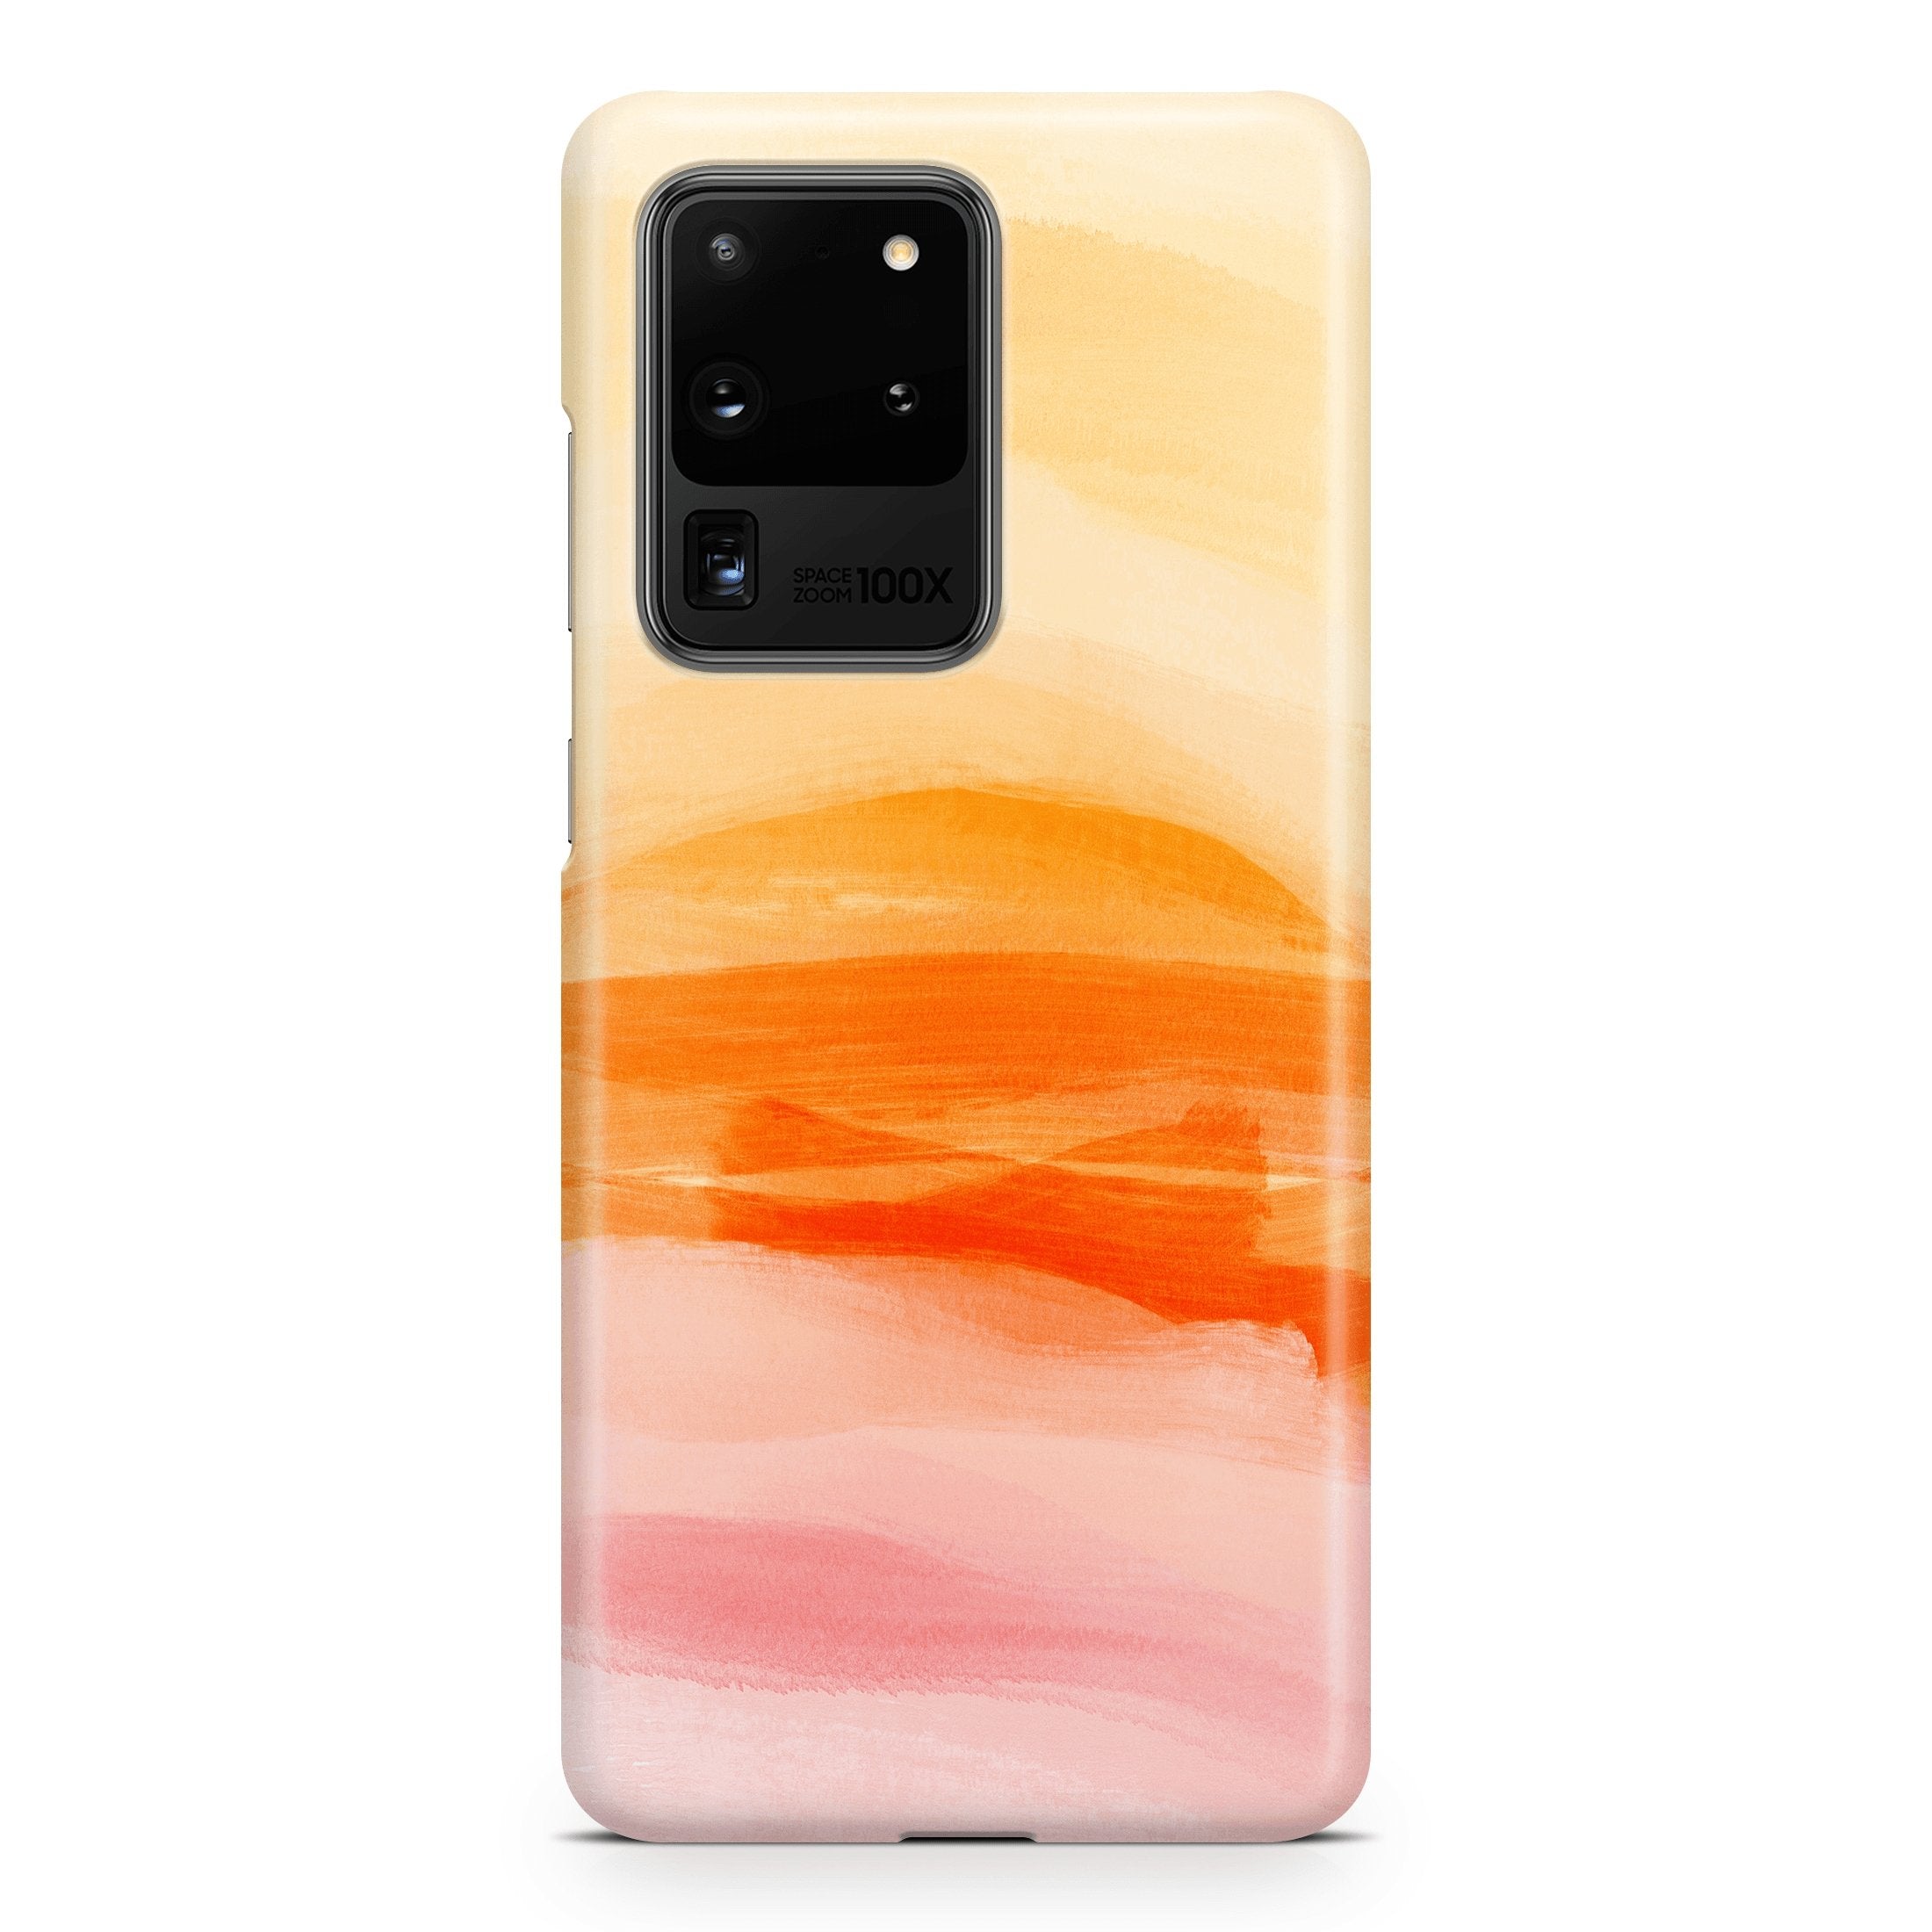 Blazing Orange Ombre - Samsung phone case designs by CaseSwagger